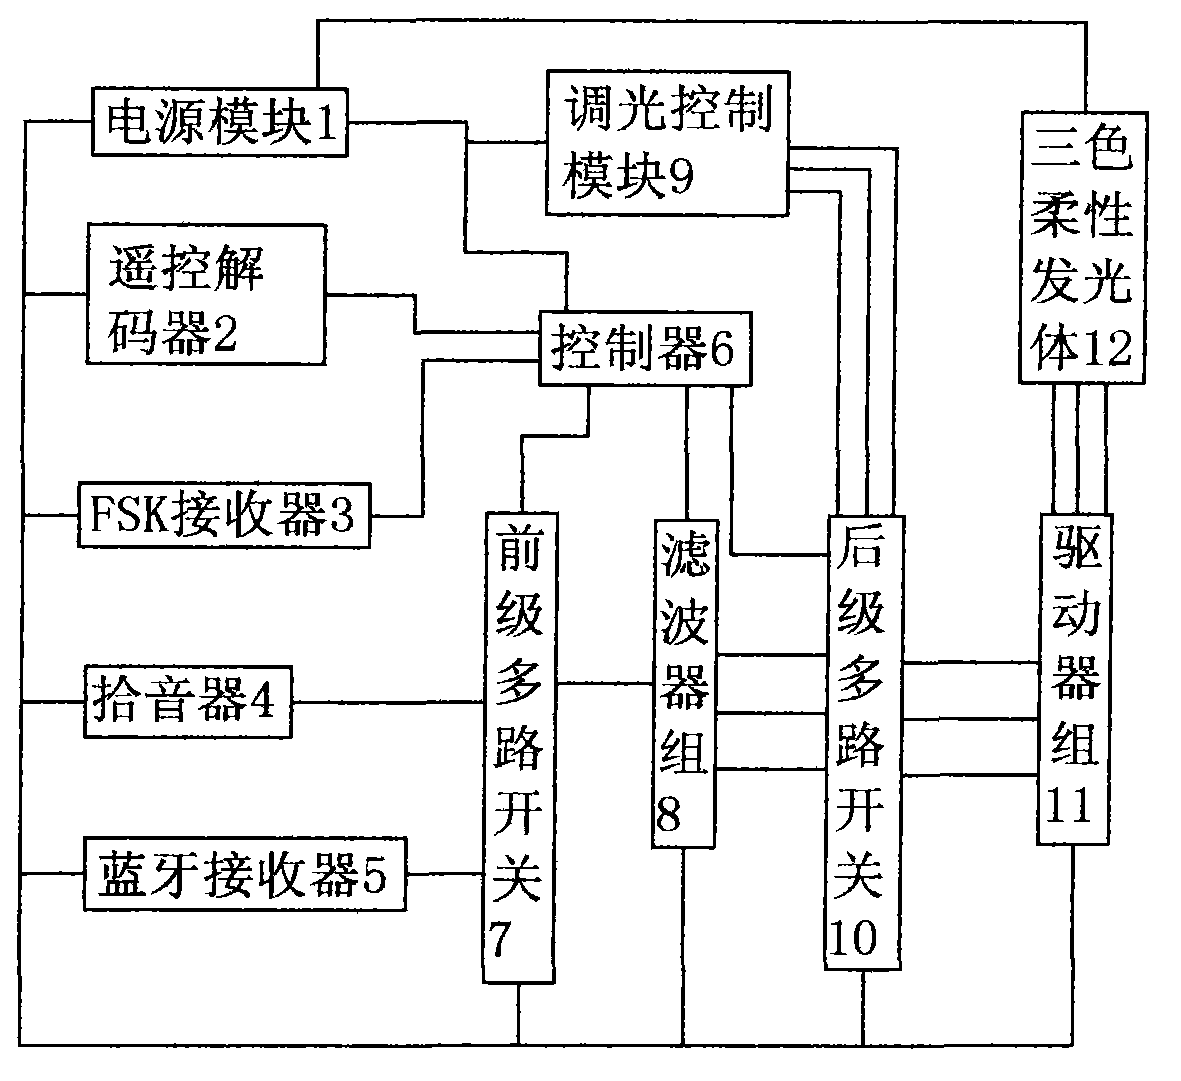 Intelligent drive control device for LED lamps